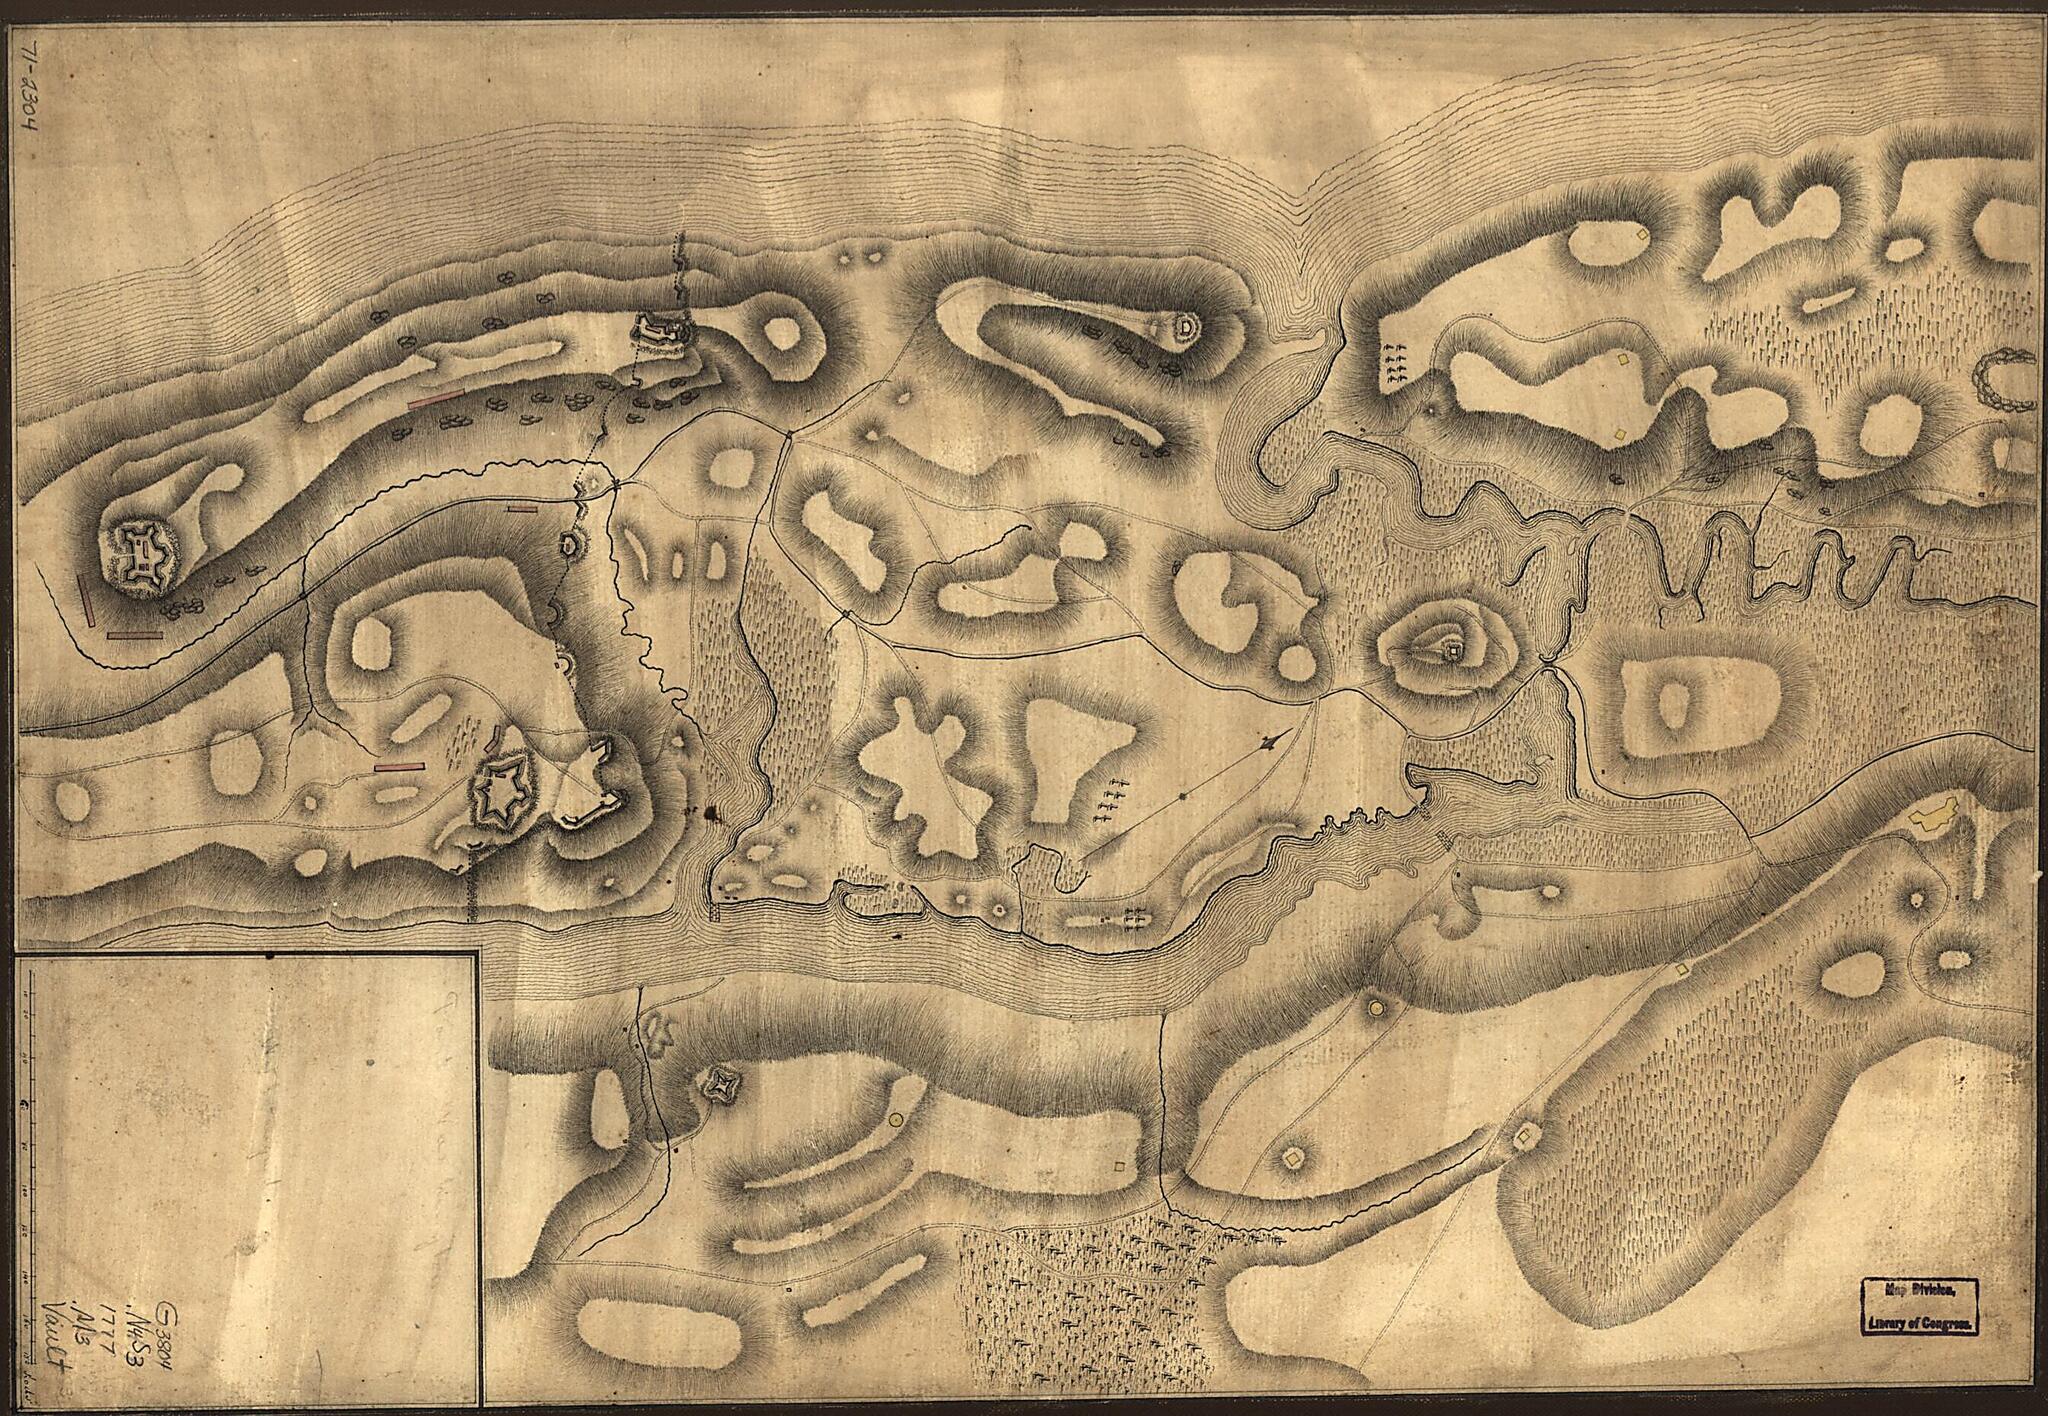 This old map of Map of Defenses of New York Island from Fort Washington to Fort Independence, With Redoubts, Etc. Planned Between from 1777 was created by  in 1777